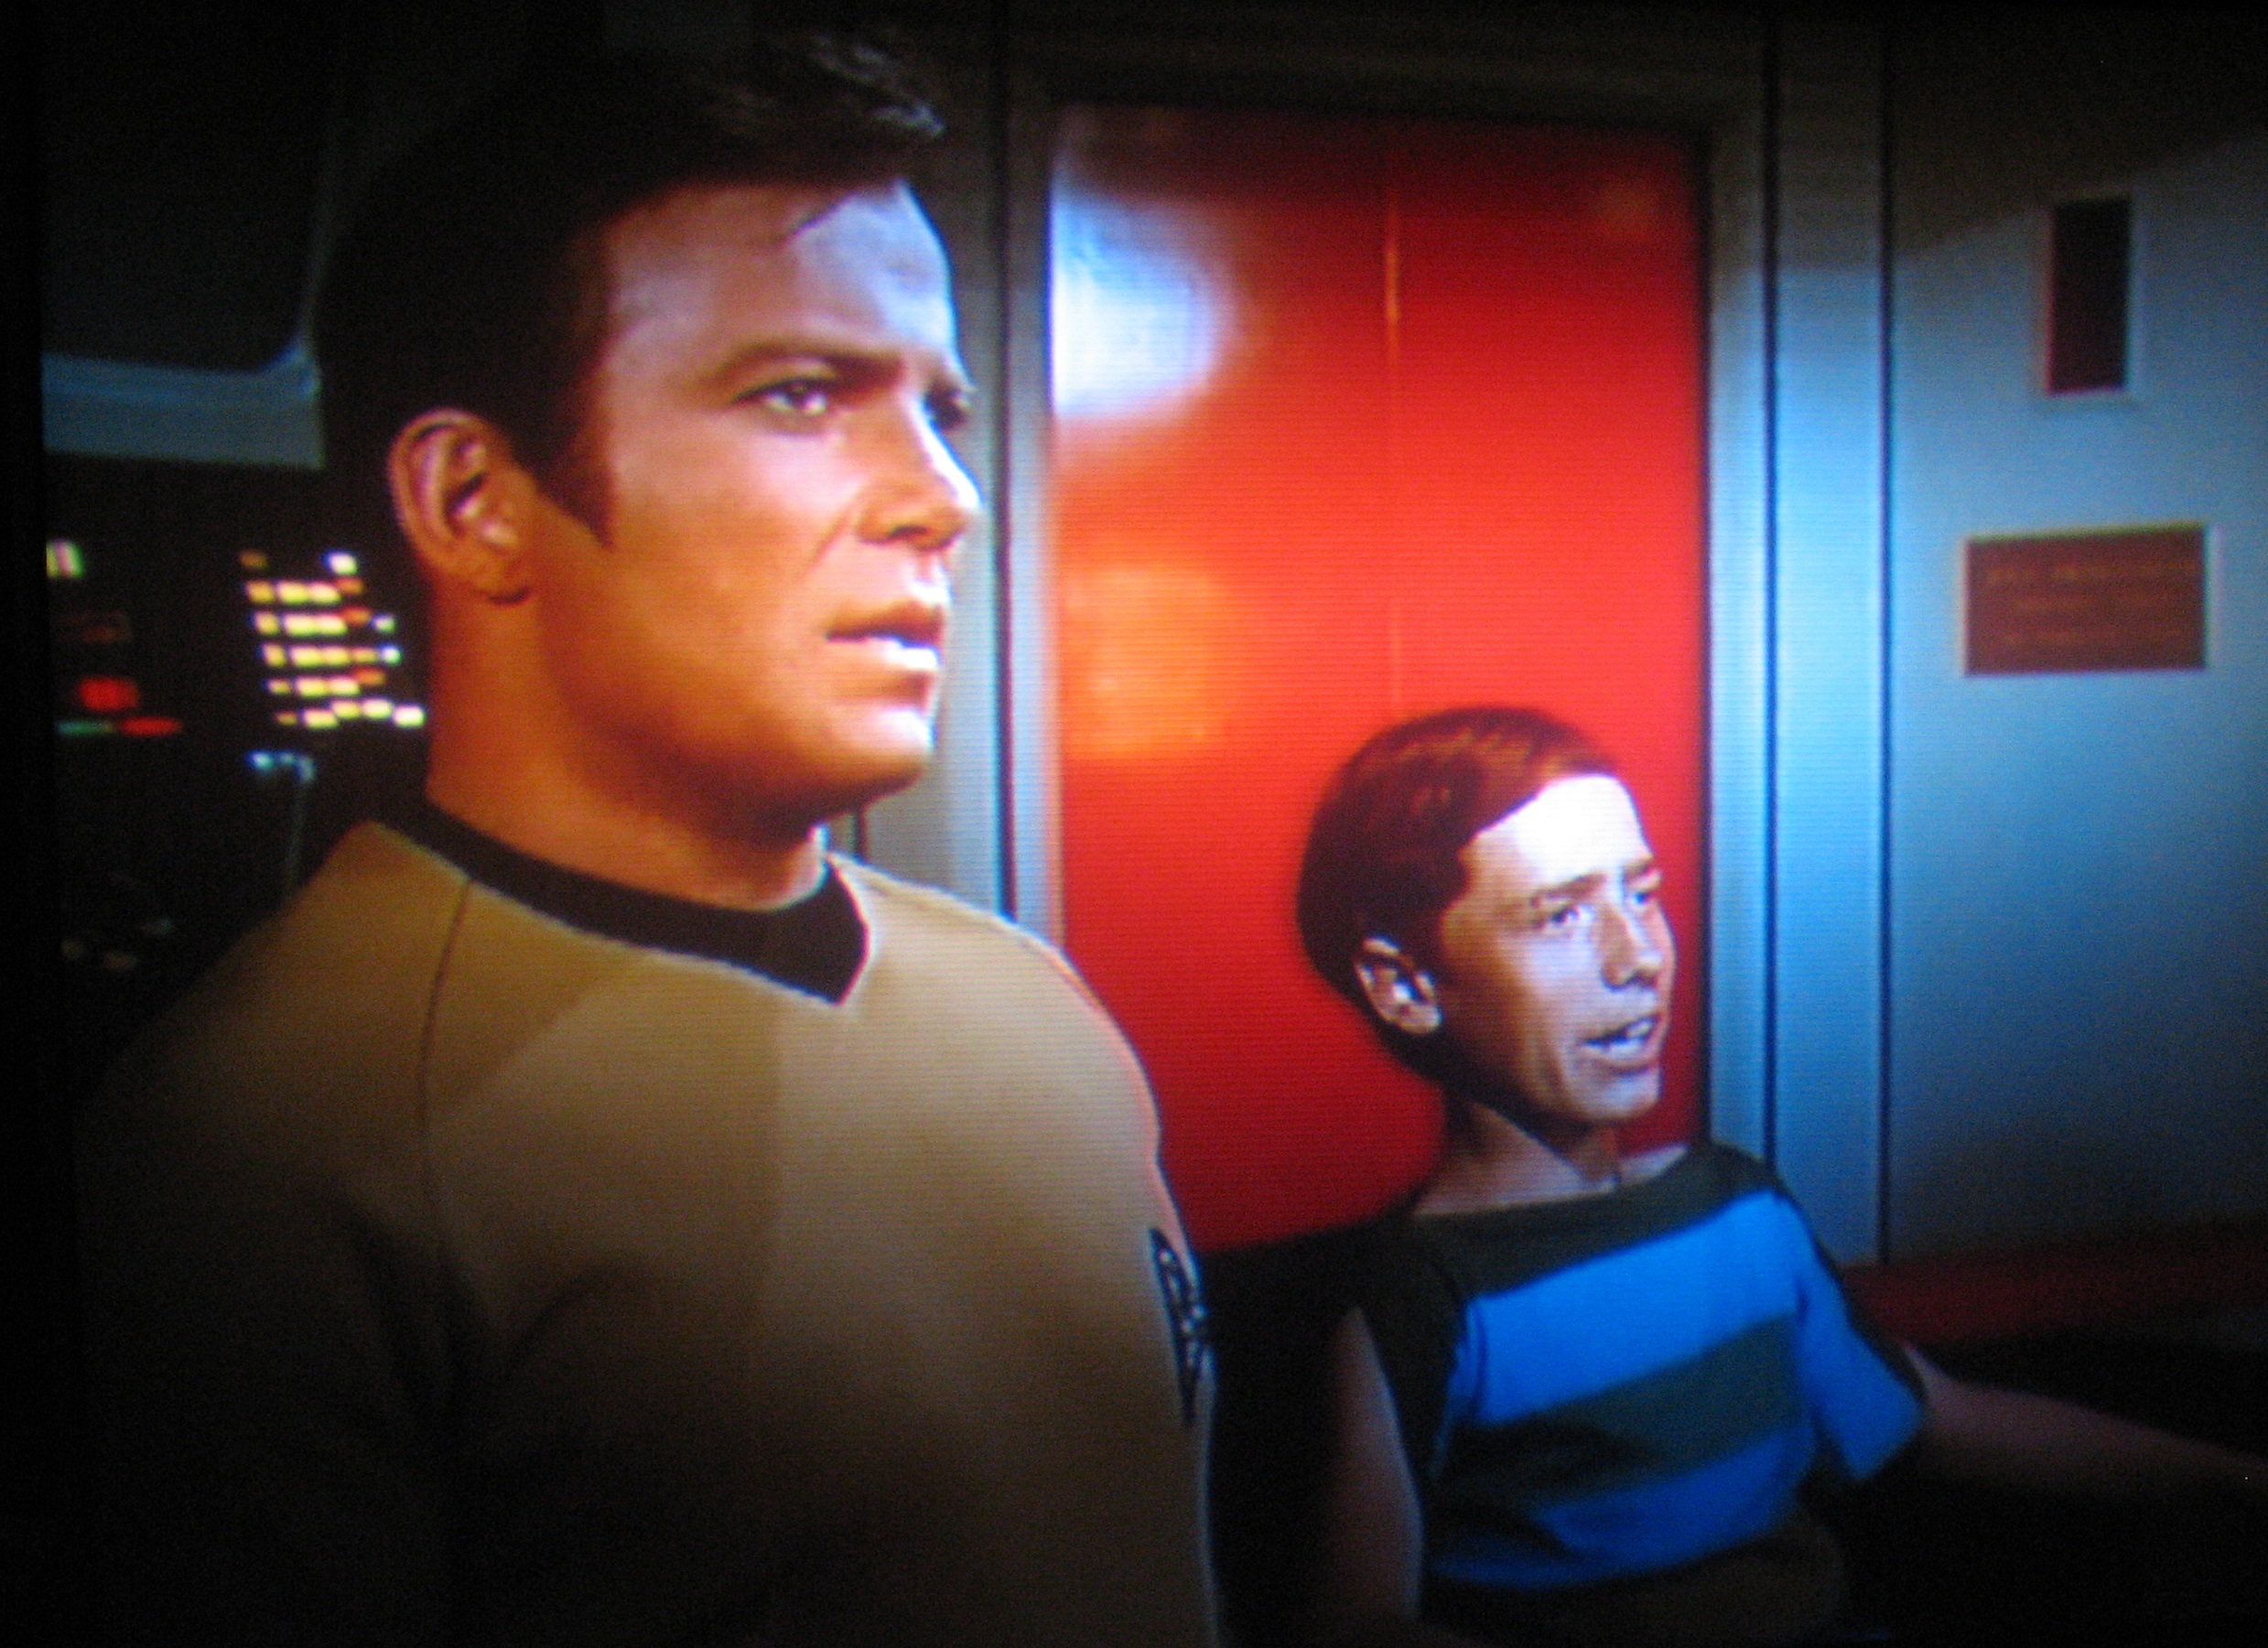 Craig at age 13 on Star Trek with Captain Kirk